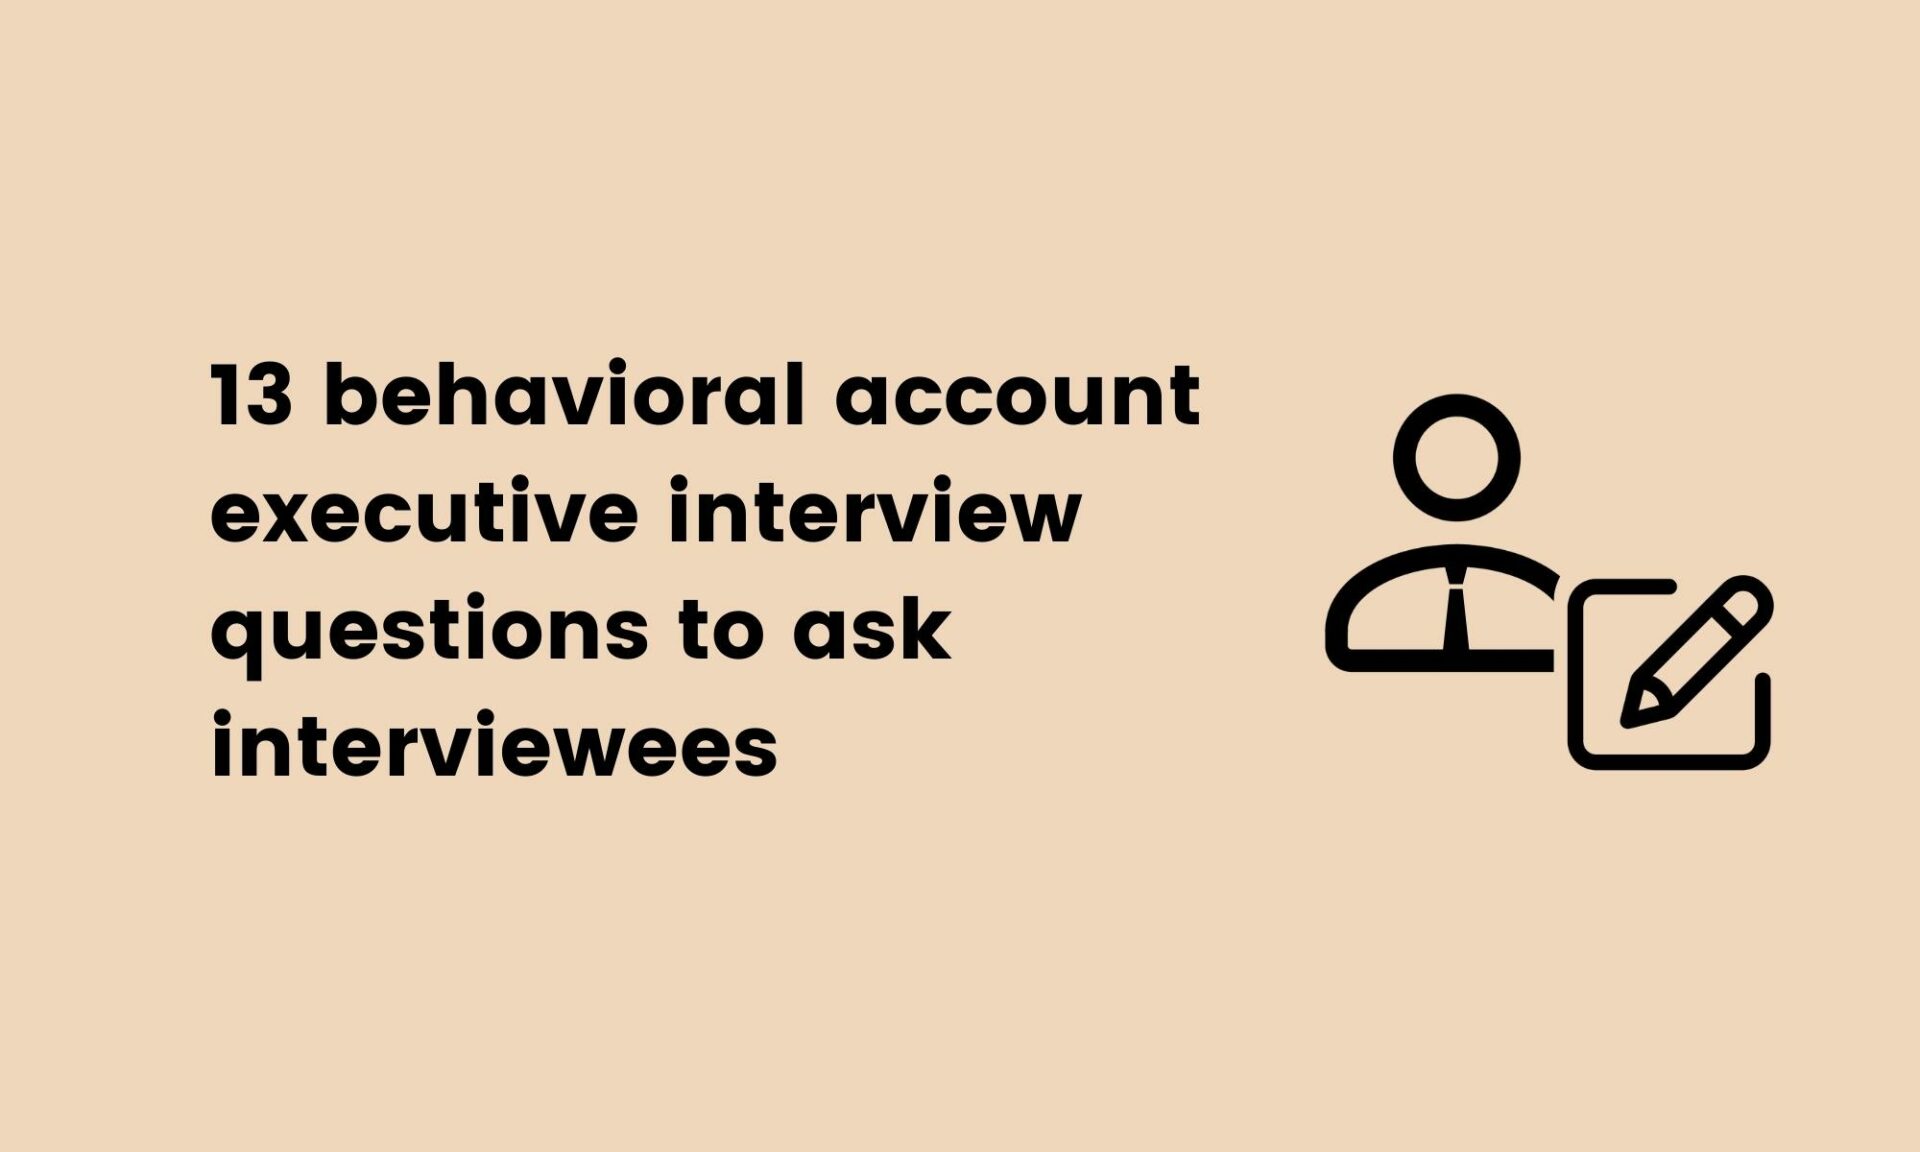 13 behavioral account executive interview questions to ask interviewees